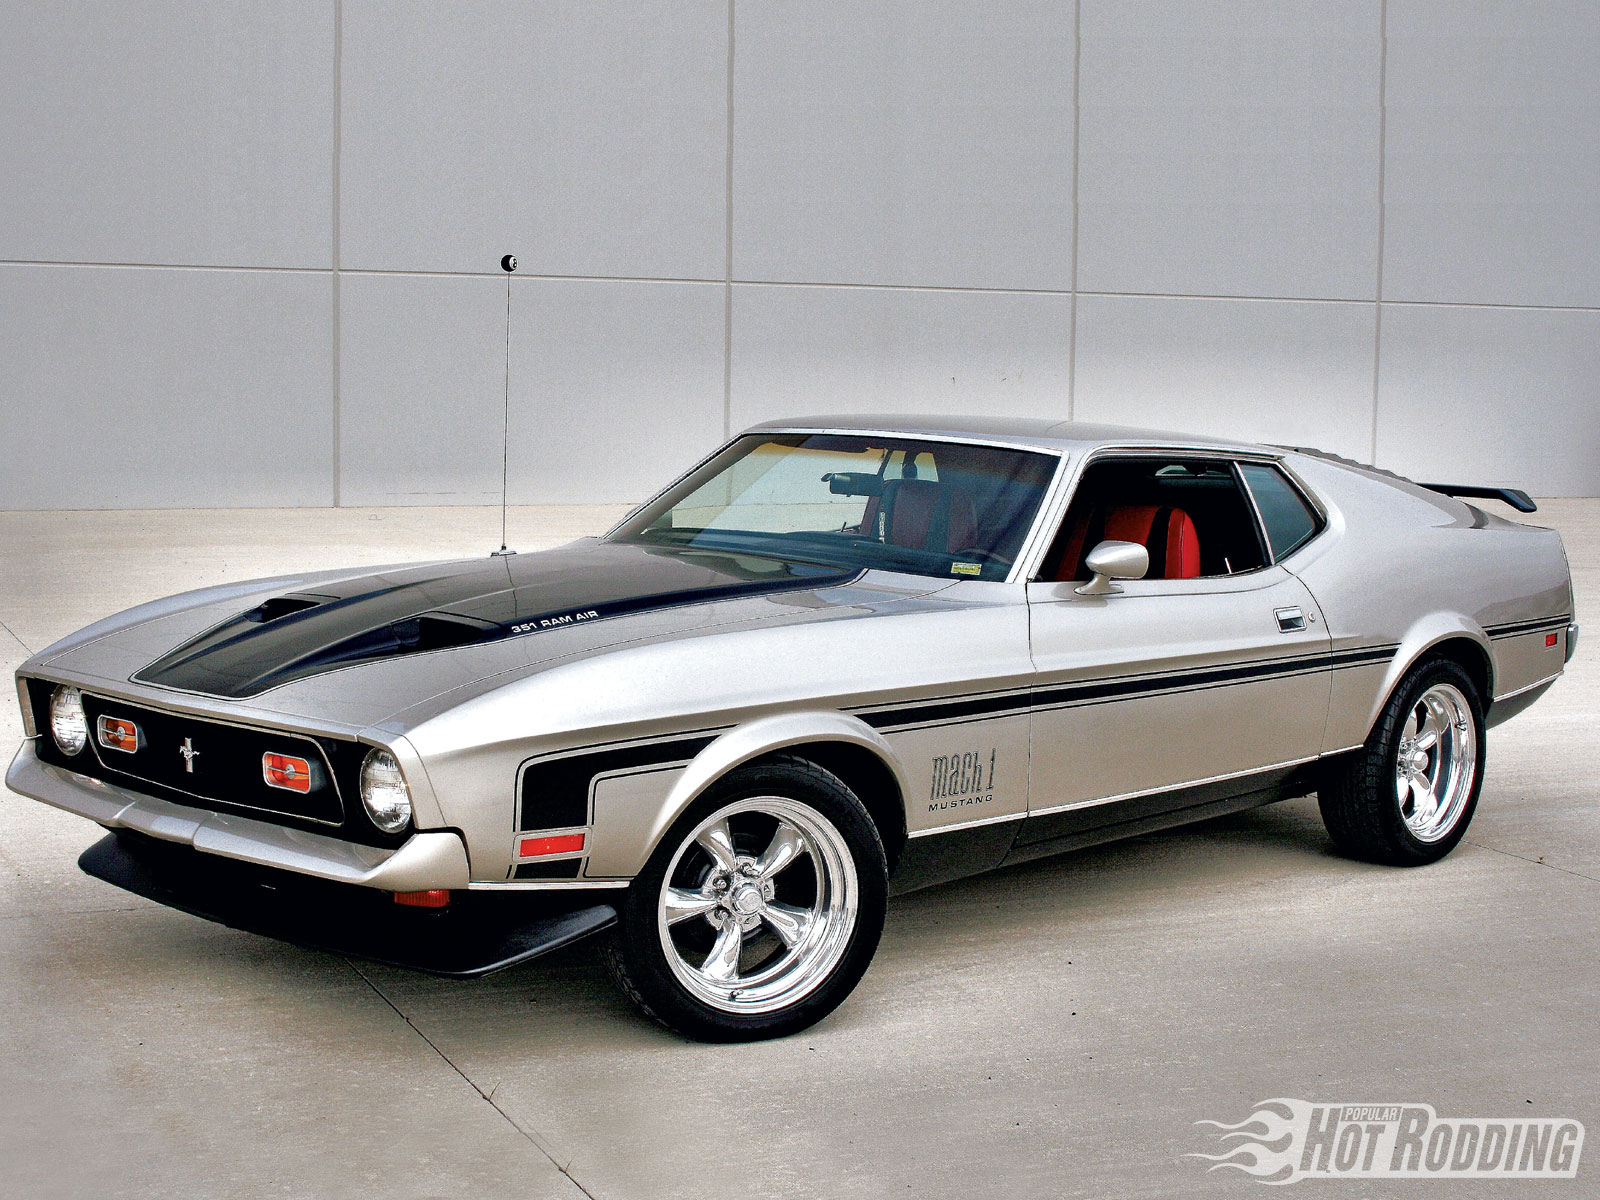 ford mustang mach 1, vehicles, classic car, fastback, ford, hot rod, muscle car Full HD